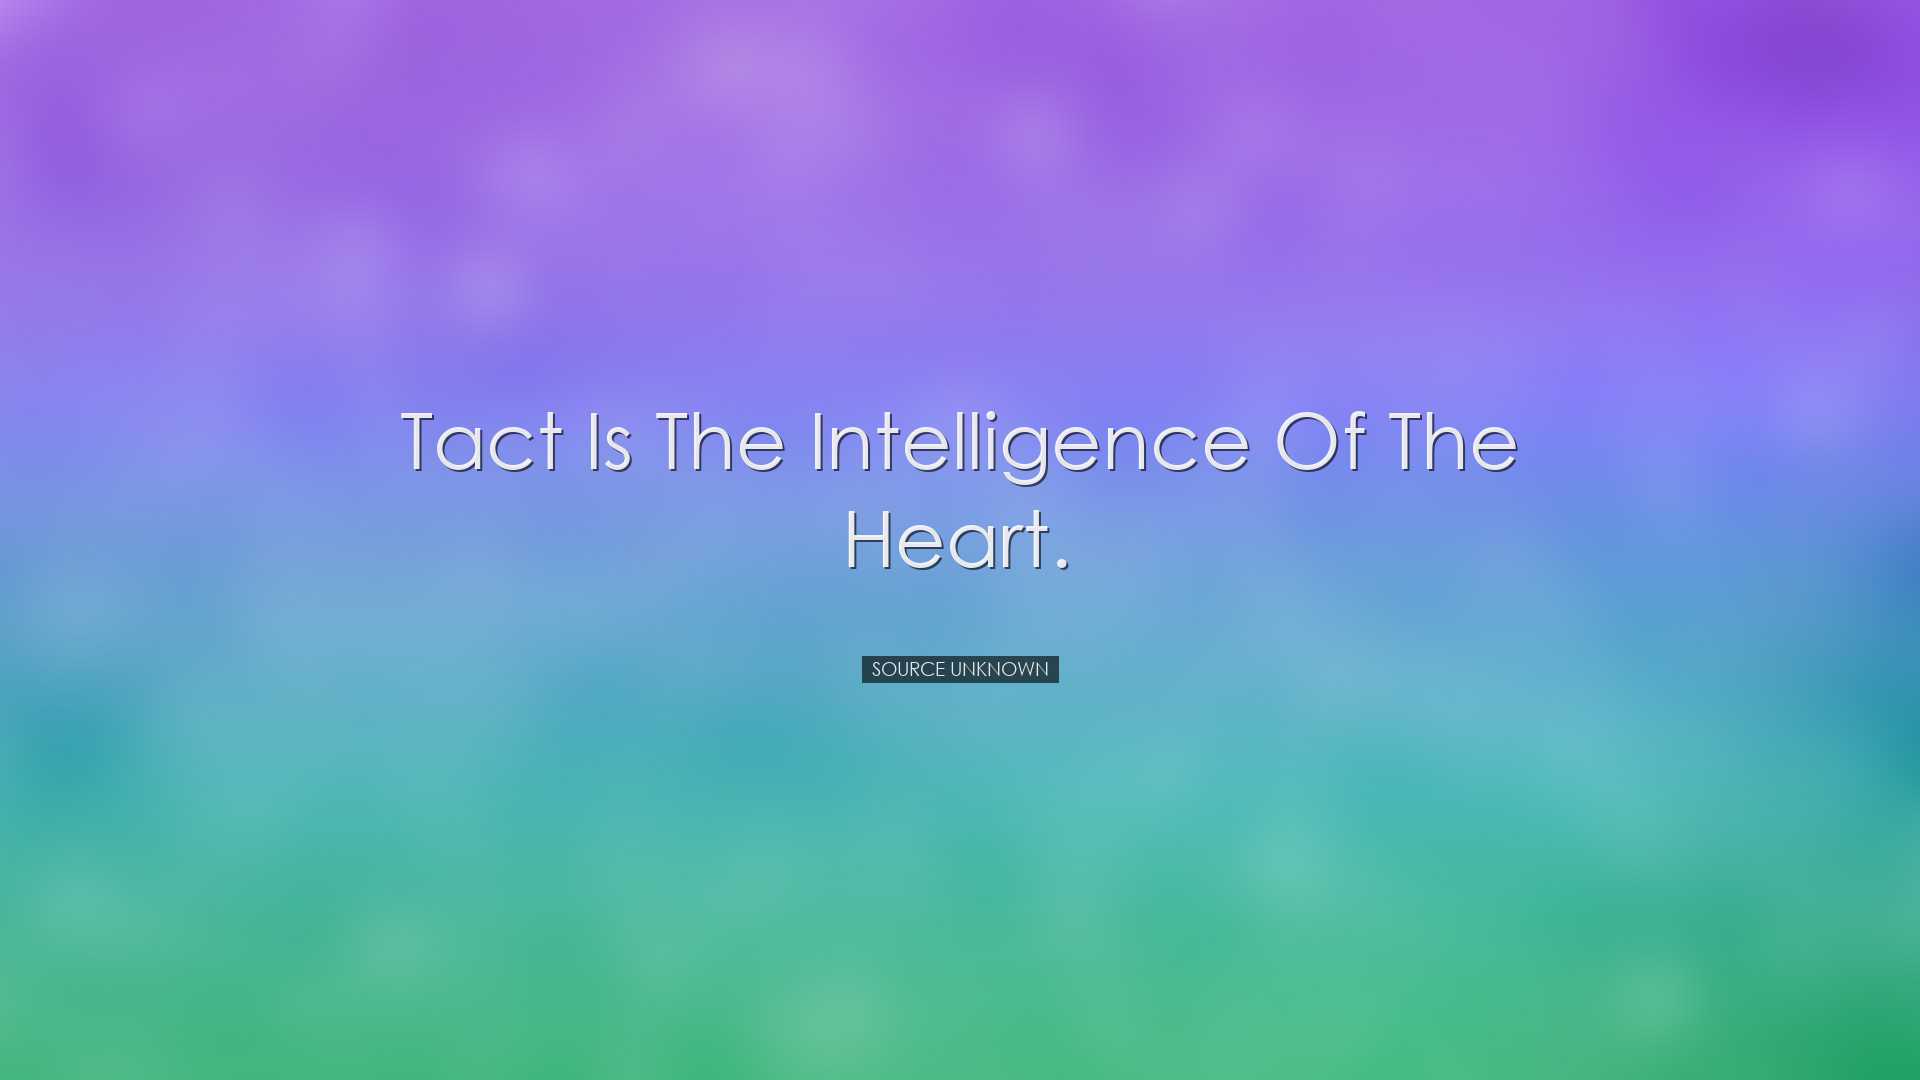 Tact is the intelligence of the heart. - Source Unknown